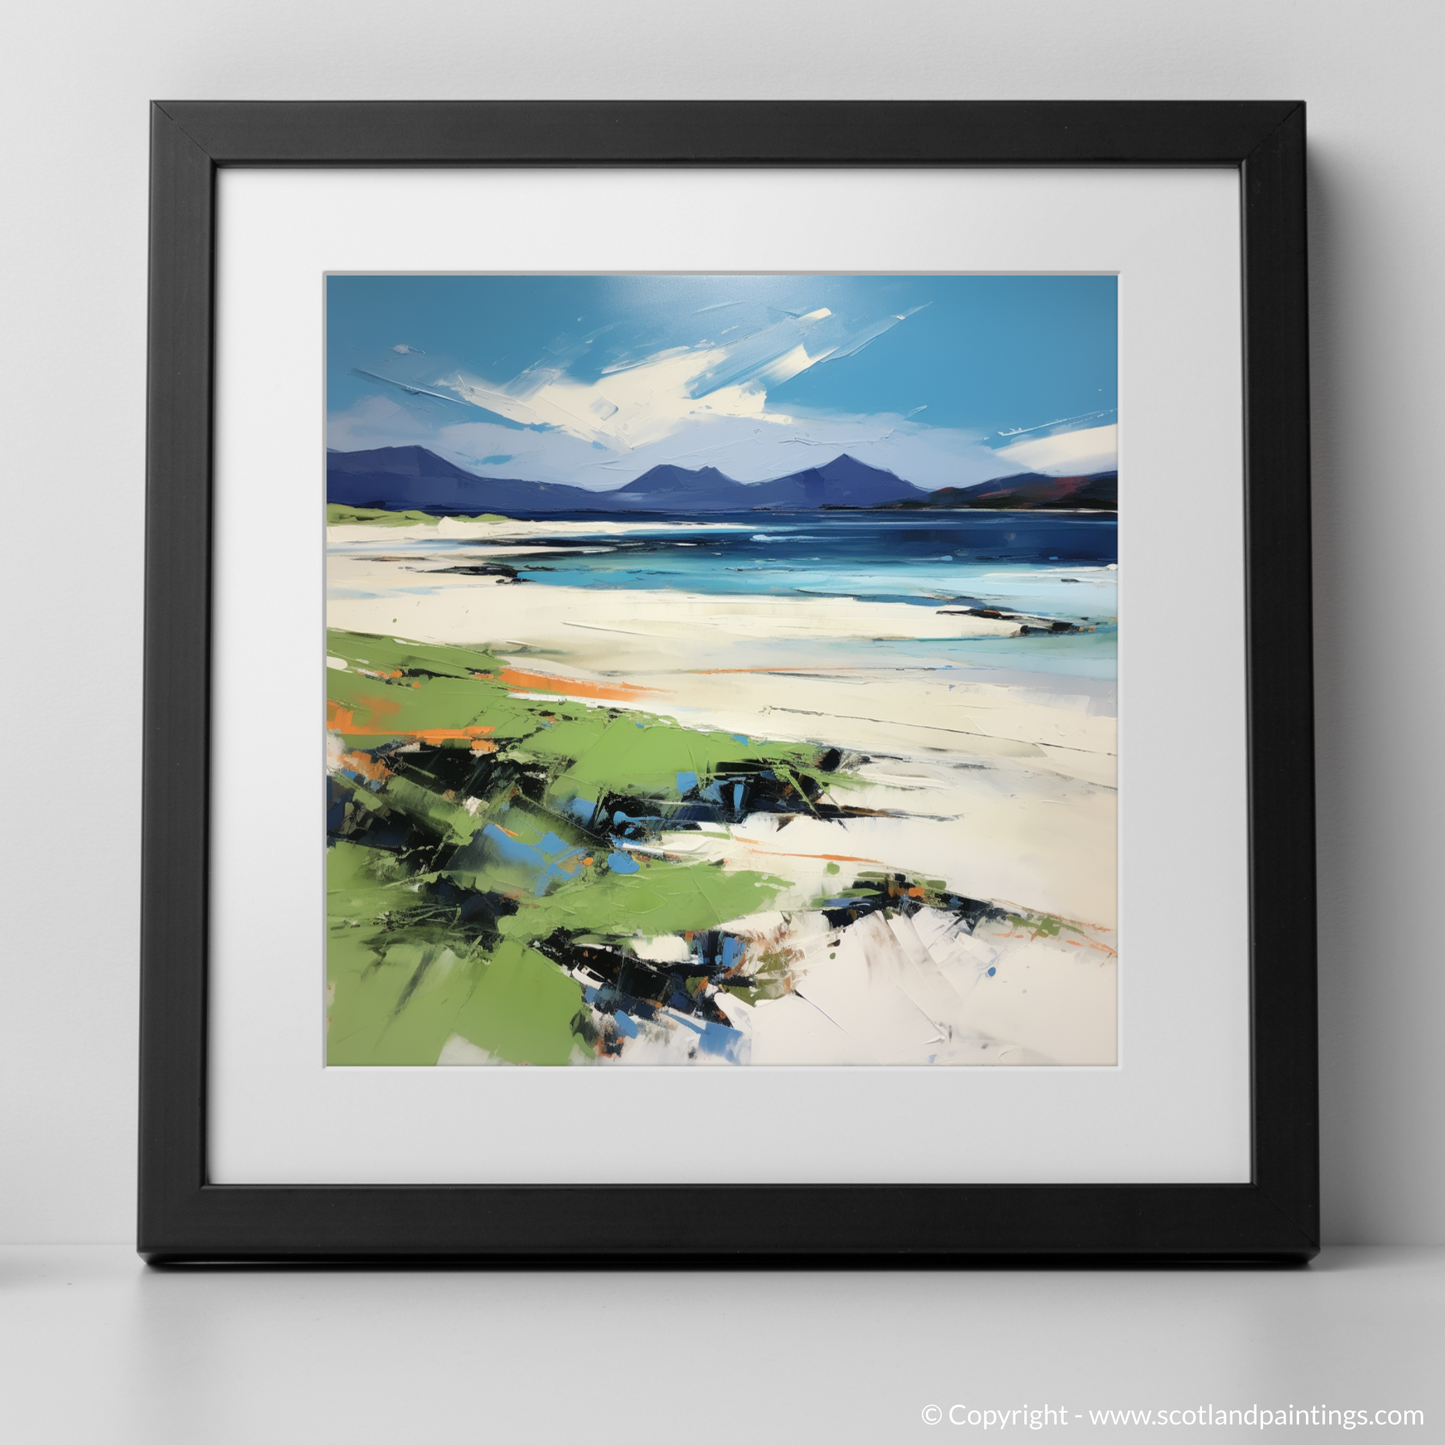 Art Print of Mellon Udrigle Beach, Wester Ross in summer with a black frame